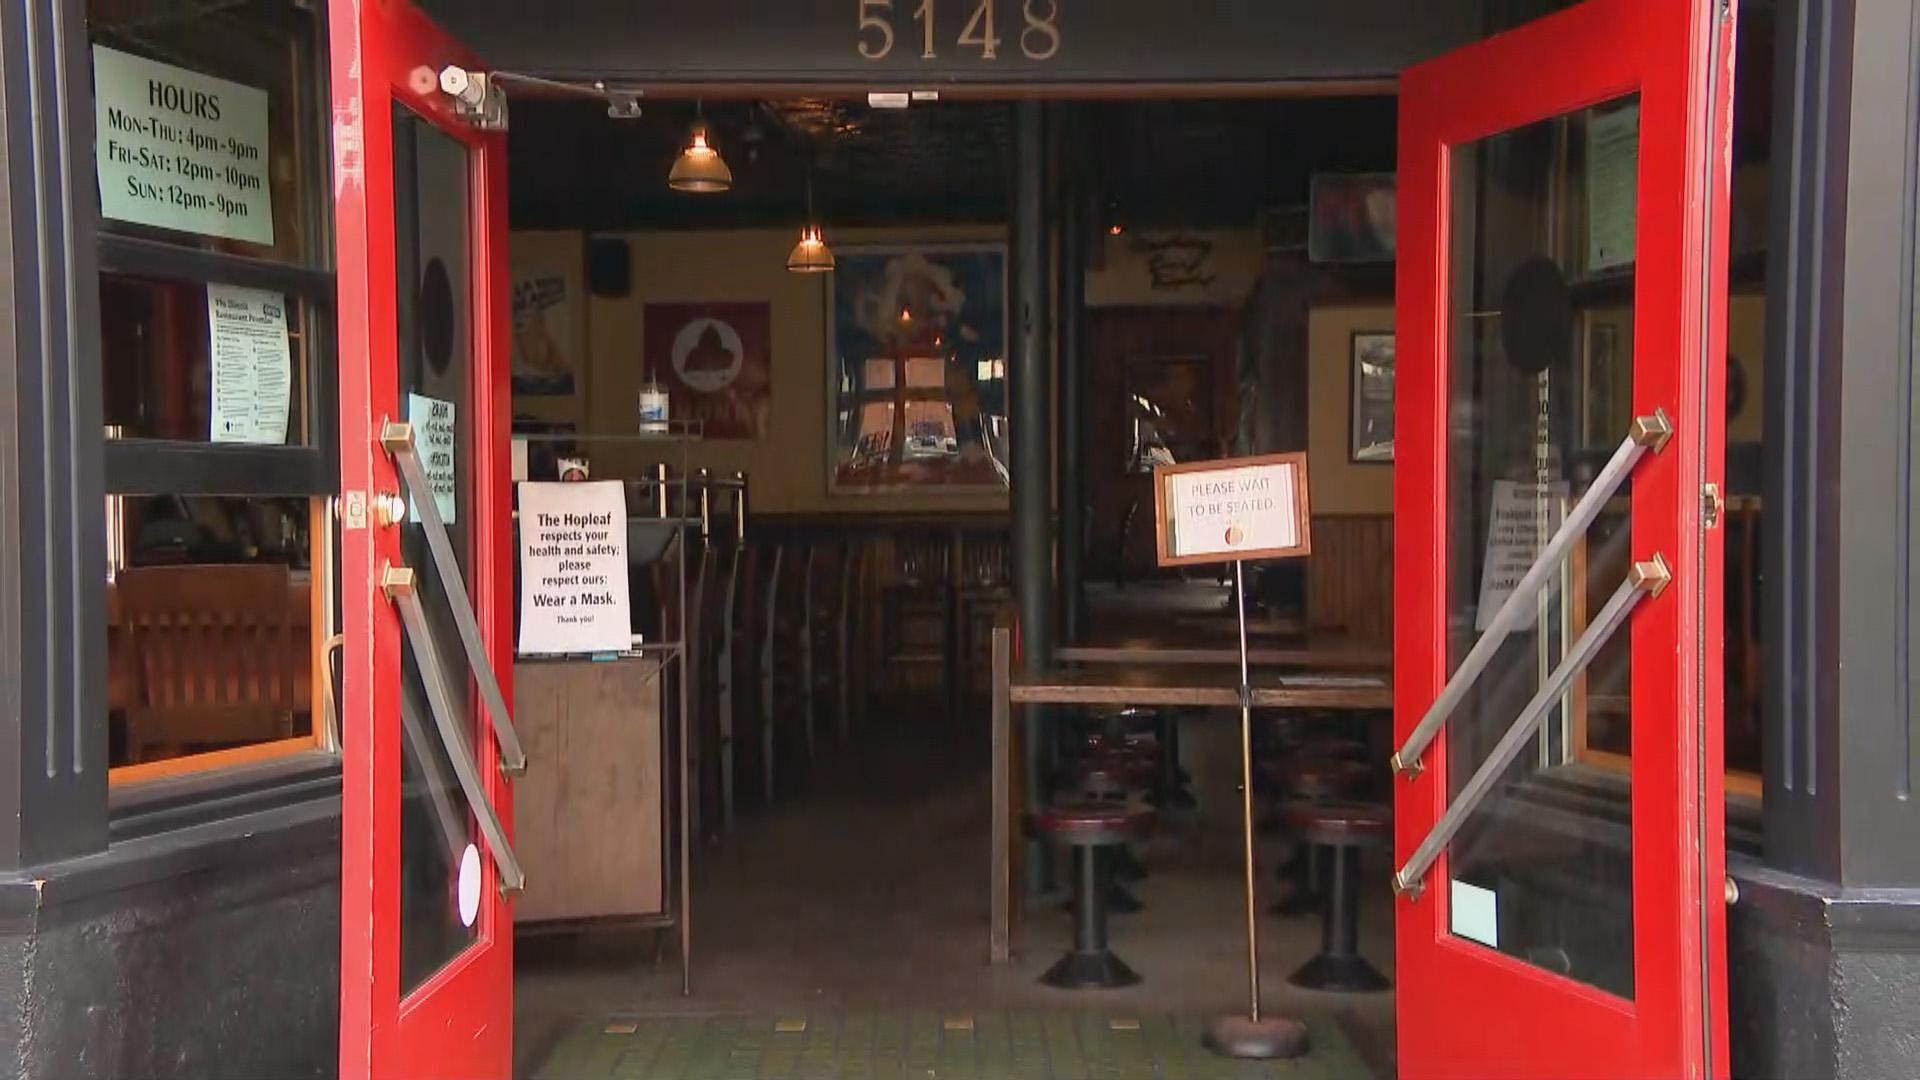 Restaurant and bar restrictions aimed at curbing the spread of COVID-19 have resulted in empty tables across Illinois and some temporary closures, including at Andersonville pub Hopleaf. (WTTW News)